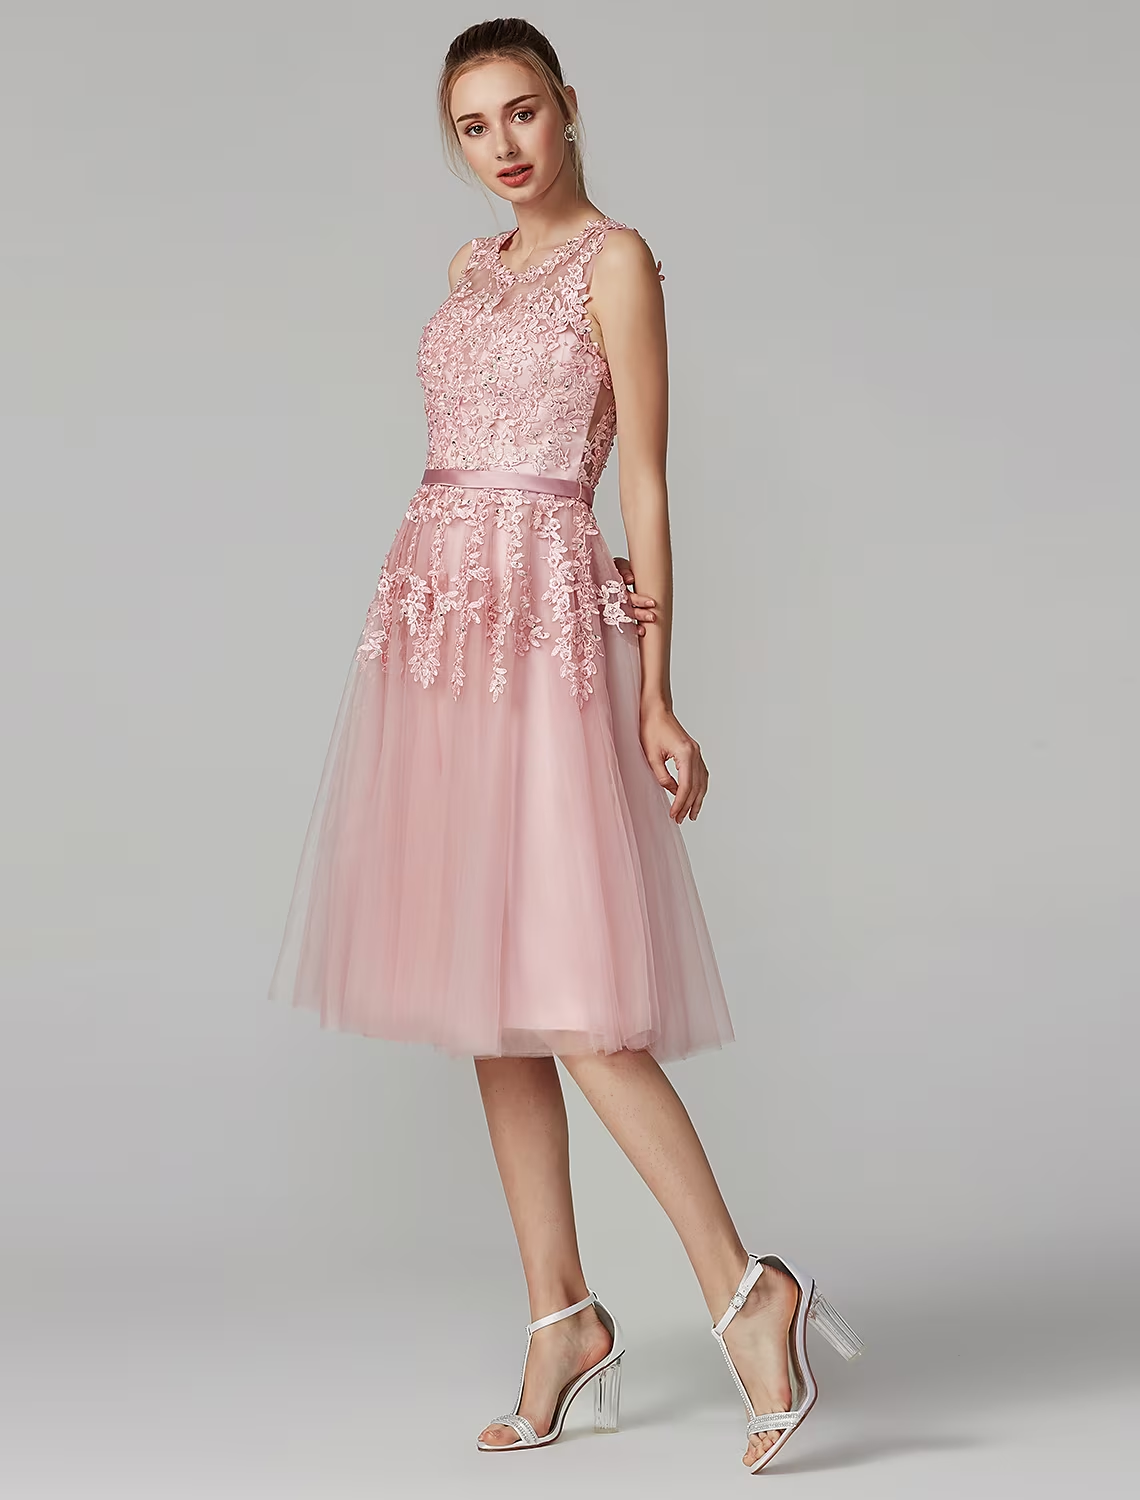 A-Line Cute Dress Cocktail Party Knee Length Sleeveless Illusion Neck Tulle Over Lace with Beading Appliques